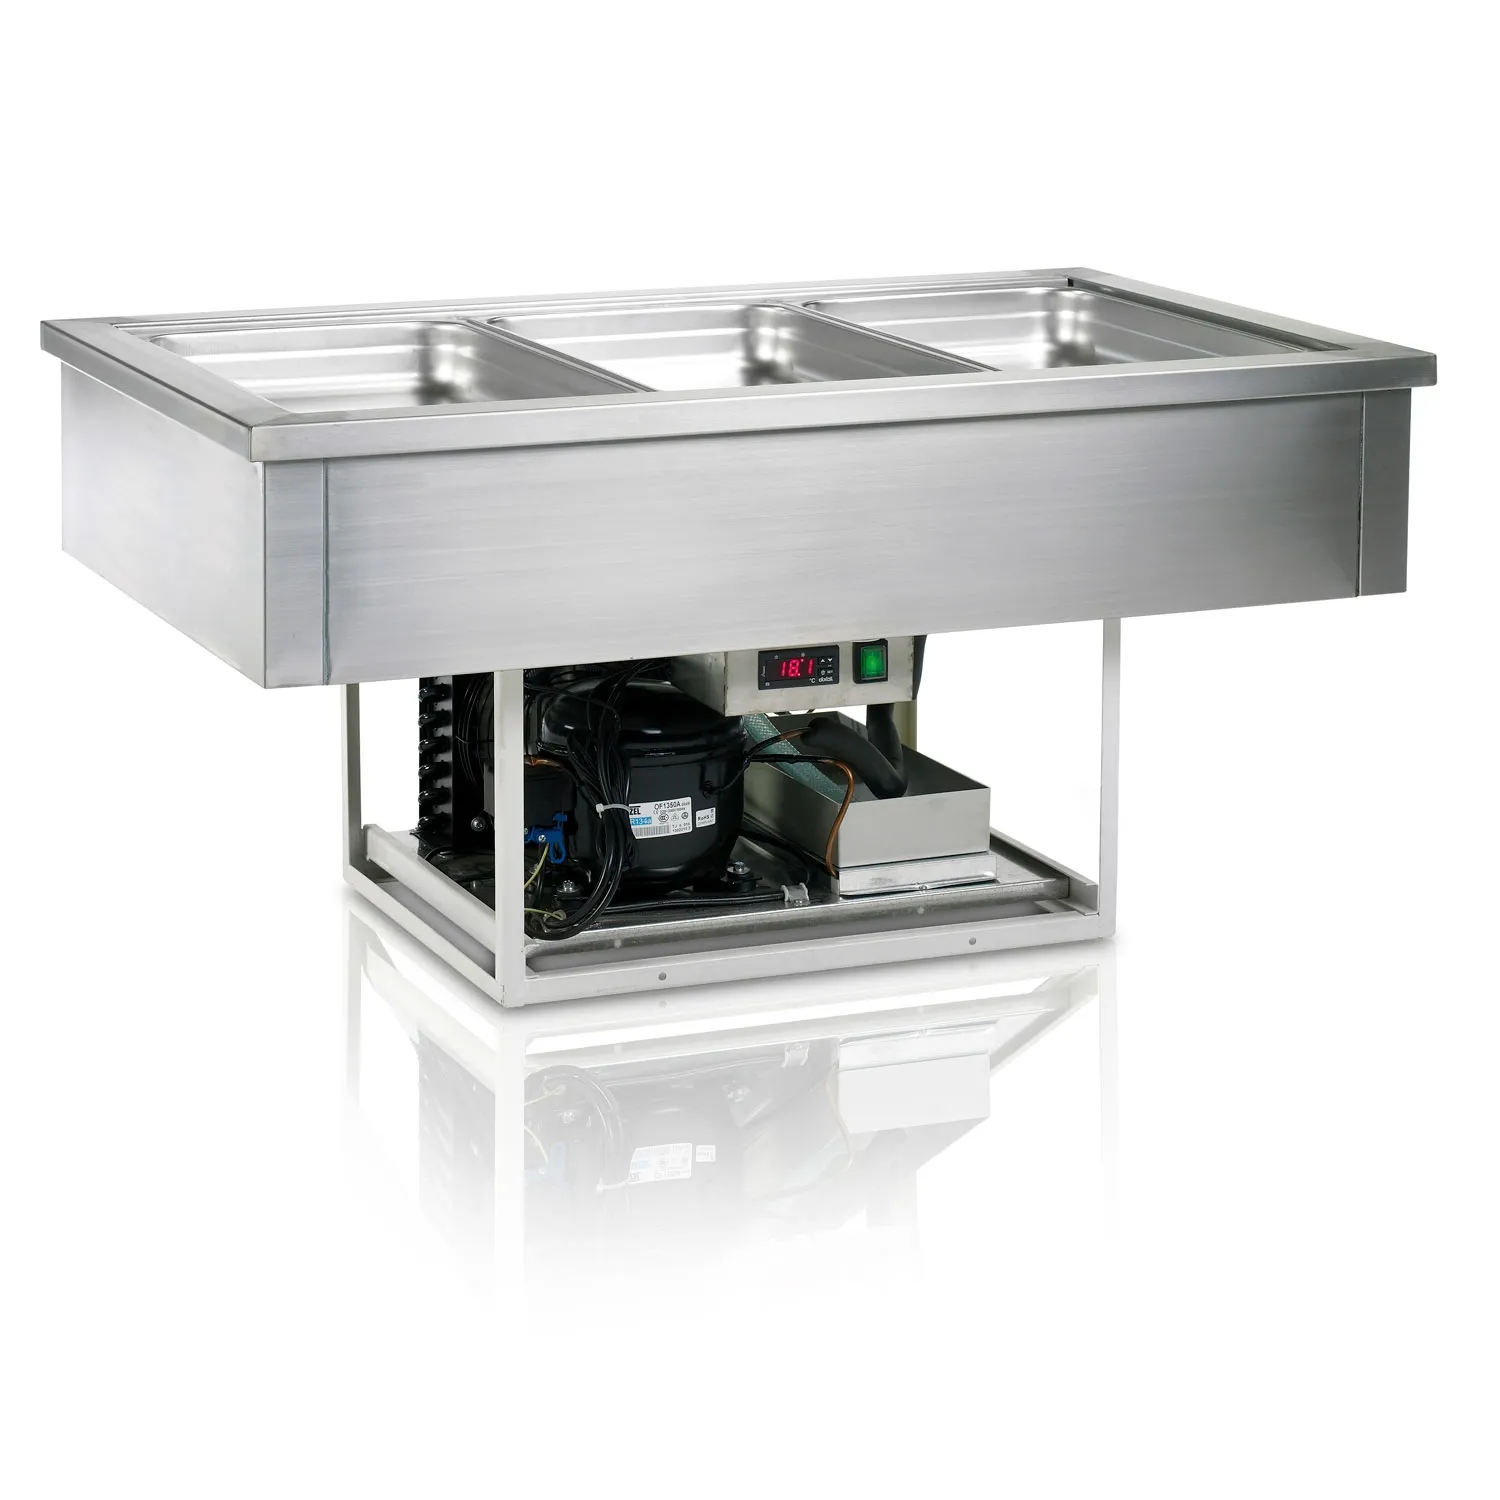 Tefcold CWV Range Drop In Refrigerated Bain marie